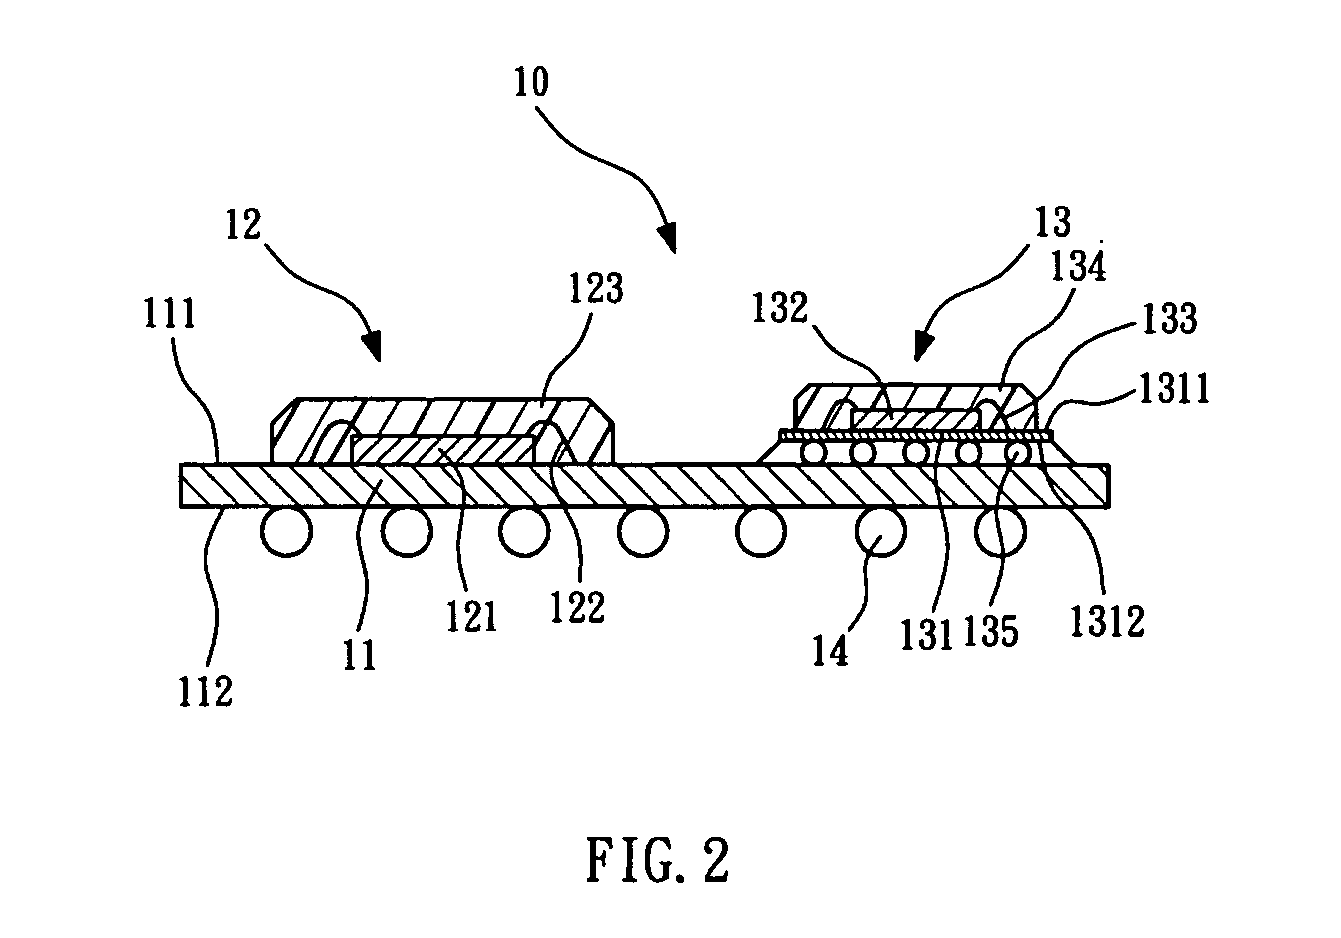 Multi-chip package structure